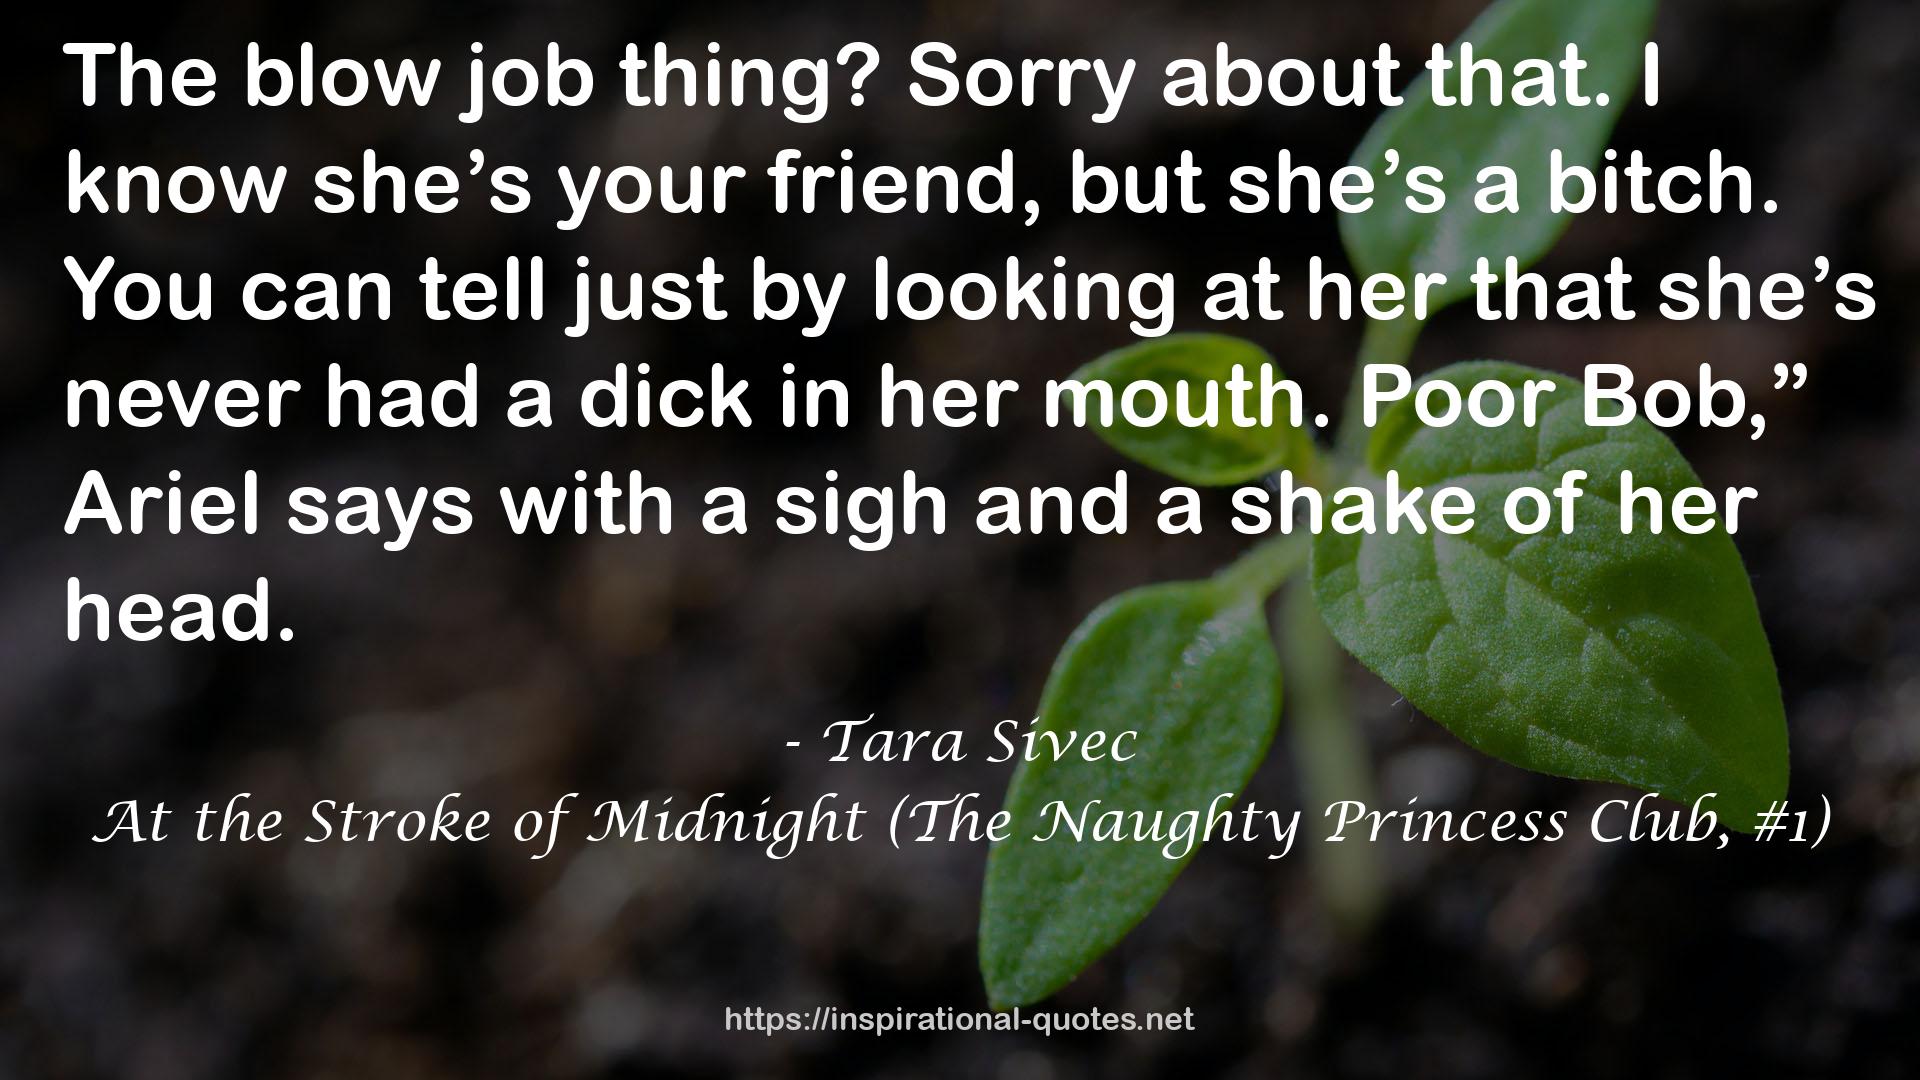 At the Stroke of Midnight (The Naughty Princess Club, #1) QUOTES